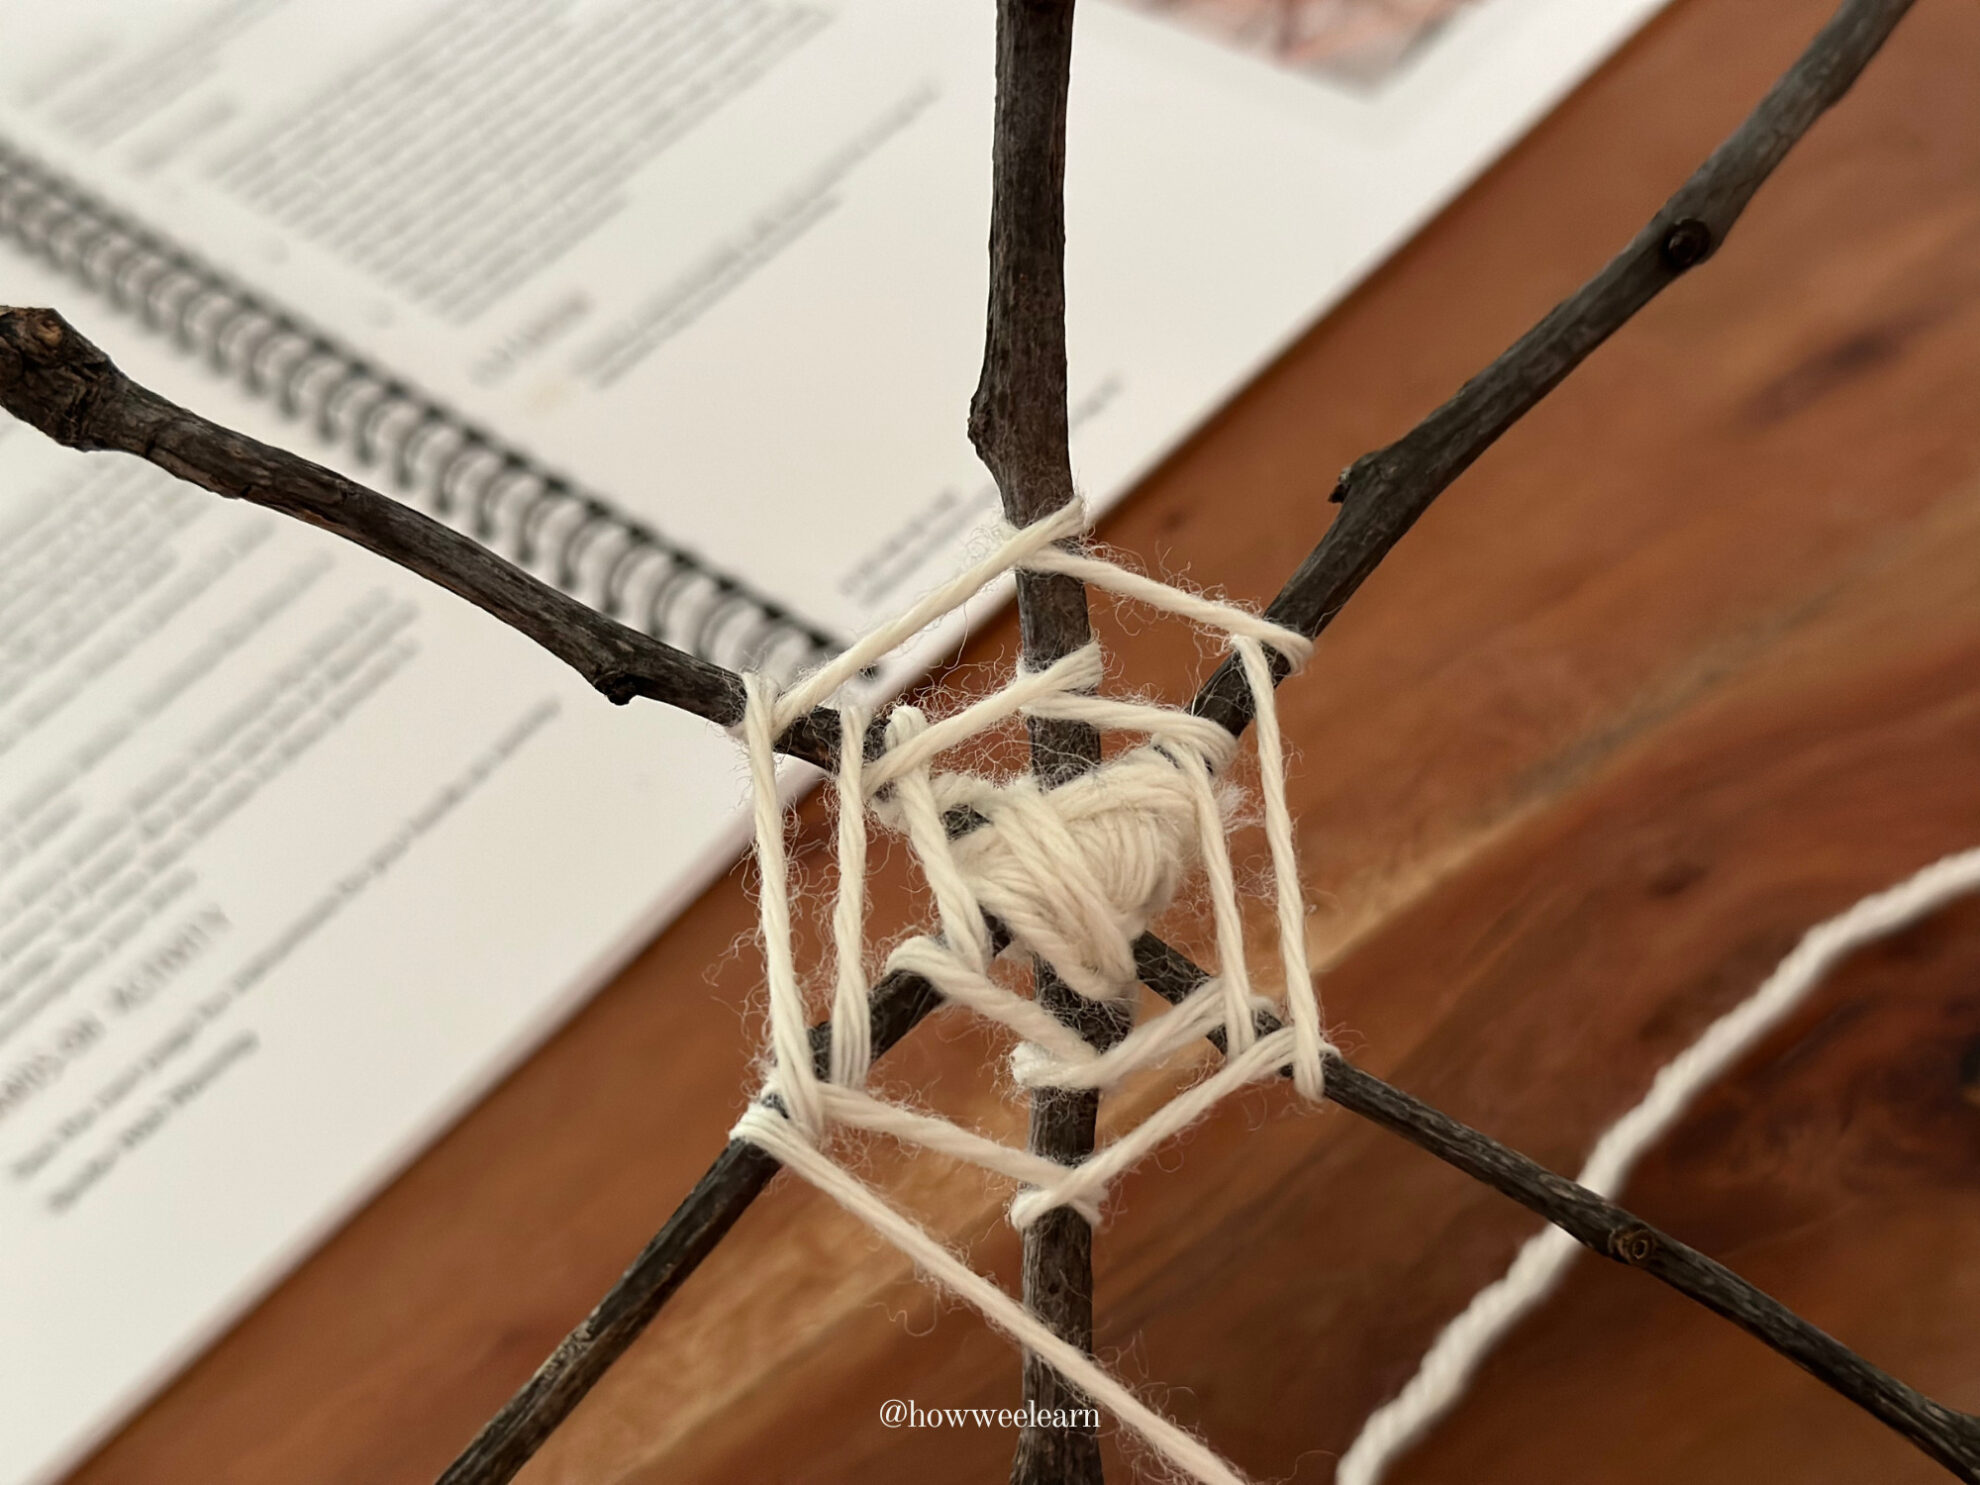 Spider Web Weaving: Wrap the yarn around each stick, moving around each stick in a circle